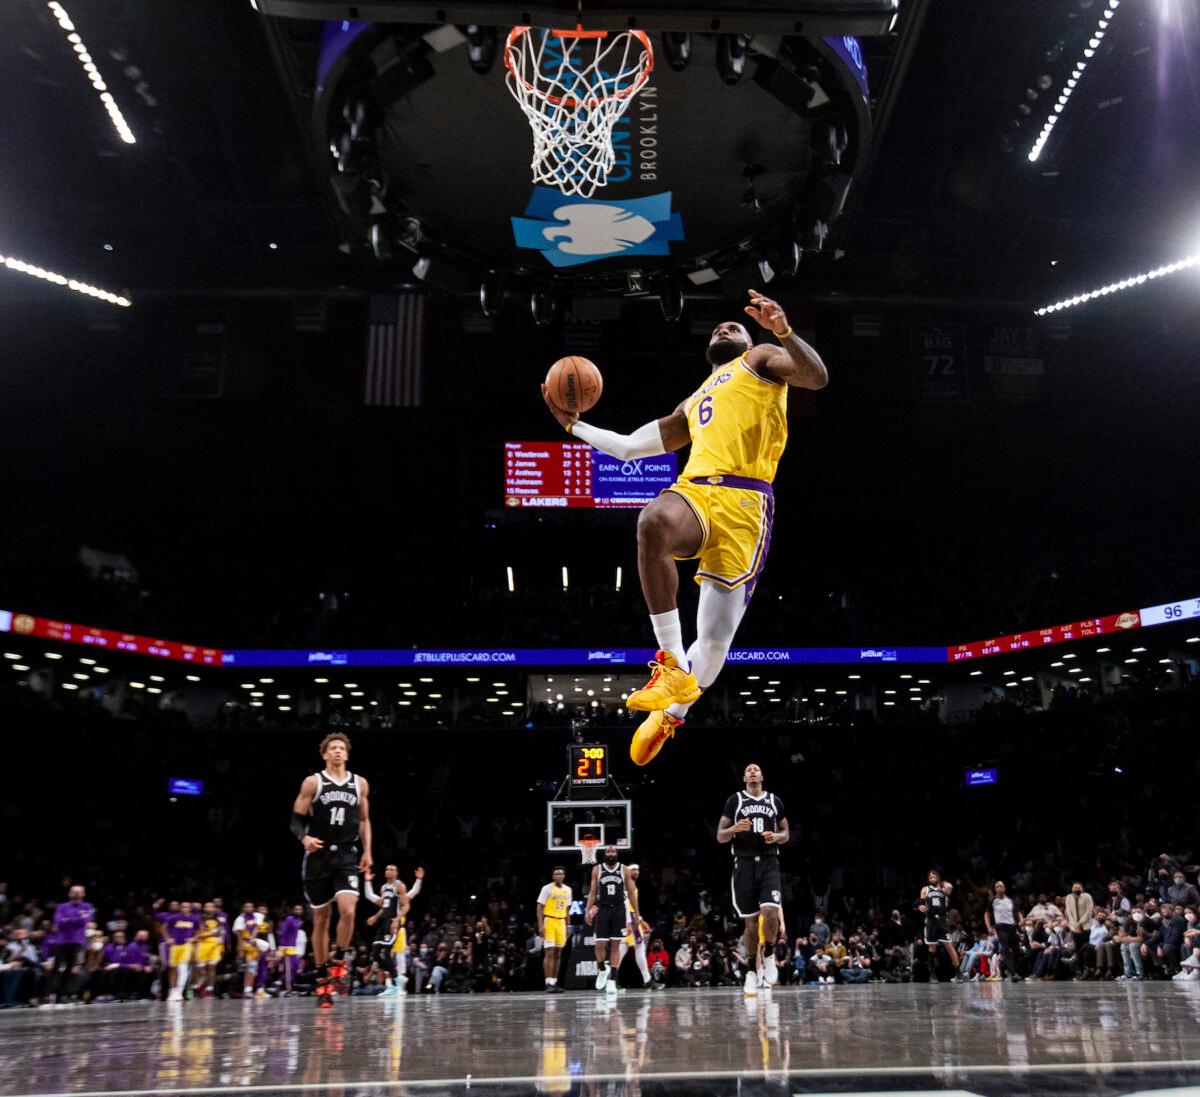 LeBron James #6 of the Los Angeles Lakers dunks against the Brooklyn Nets at Barclays Center, in New York City, on Jan. 25, 2022. (Michelle Farsi/Getty Images)